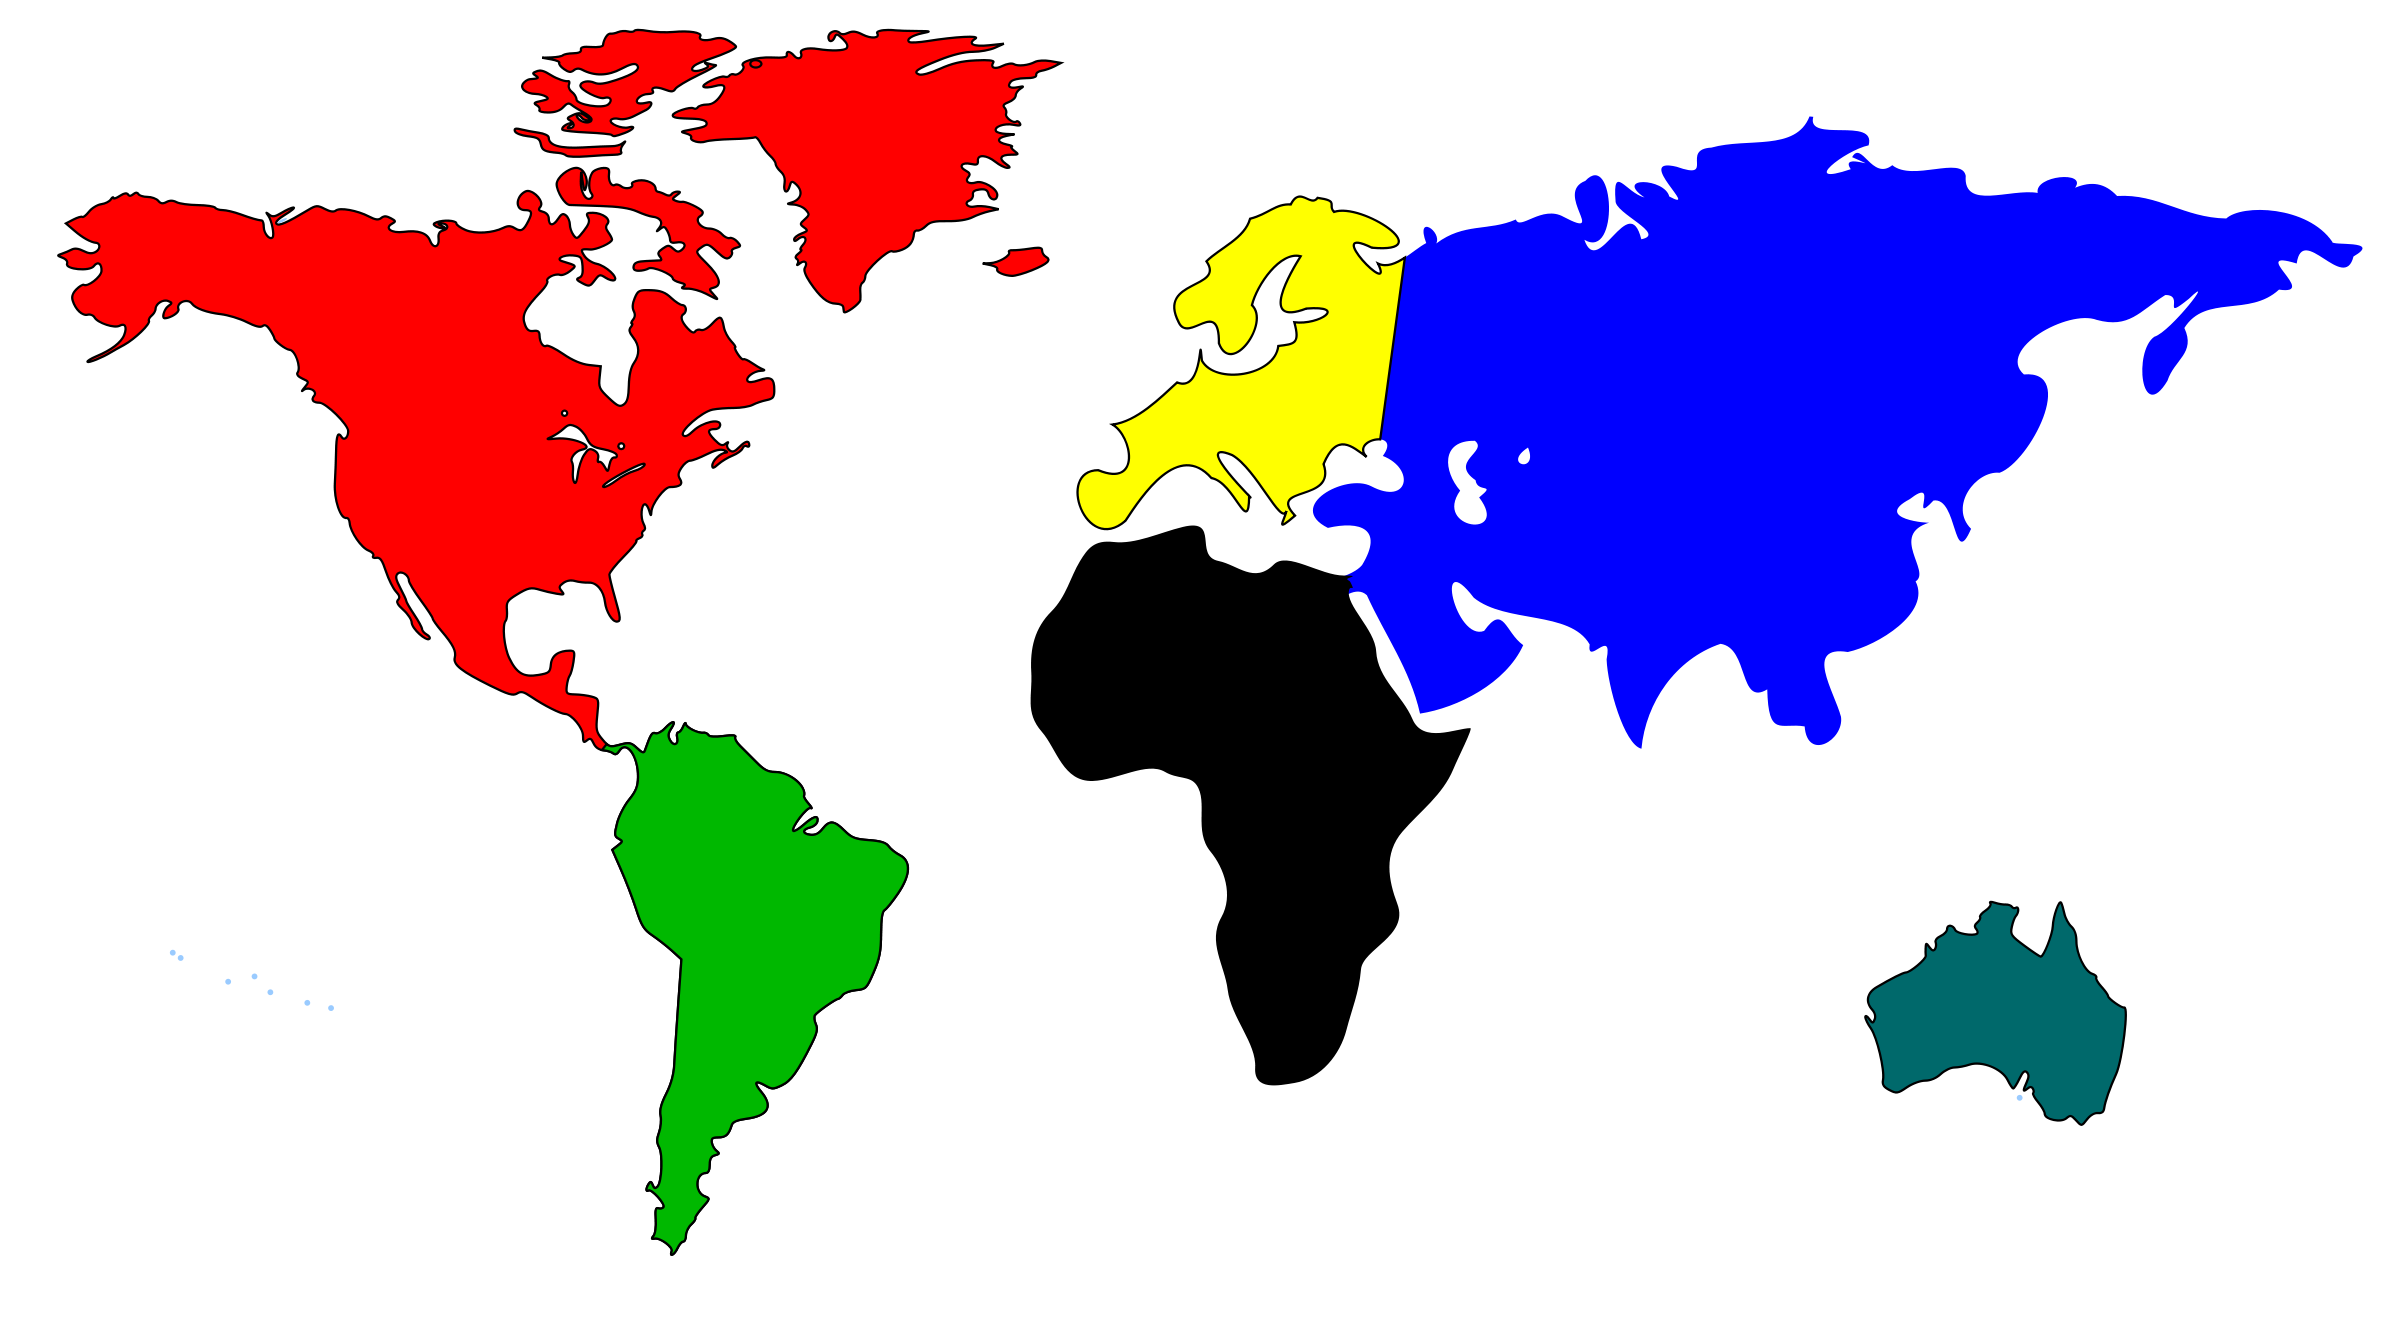 Clipart map of the world - ClipartFox